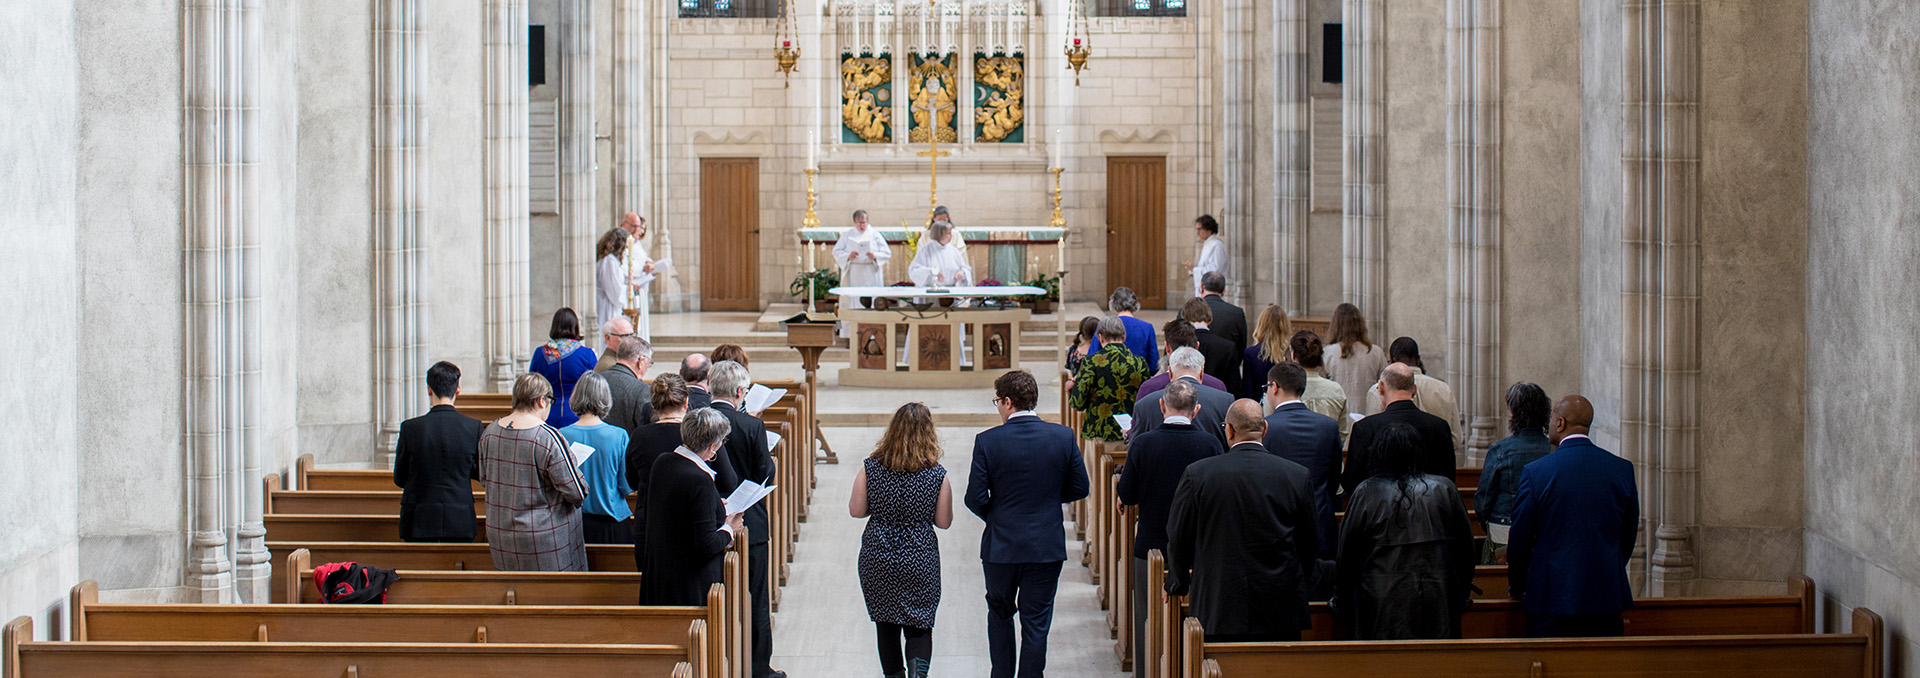 Faculty of Divinity service in the Chapel prior to Convocation 2019